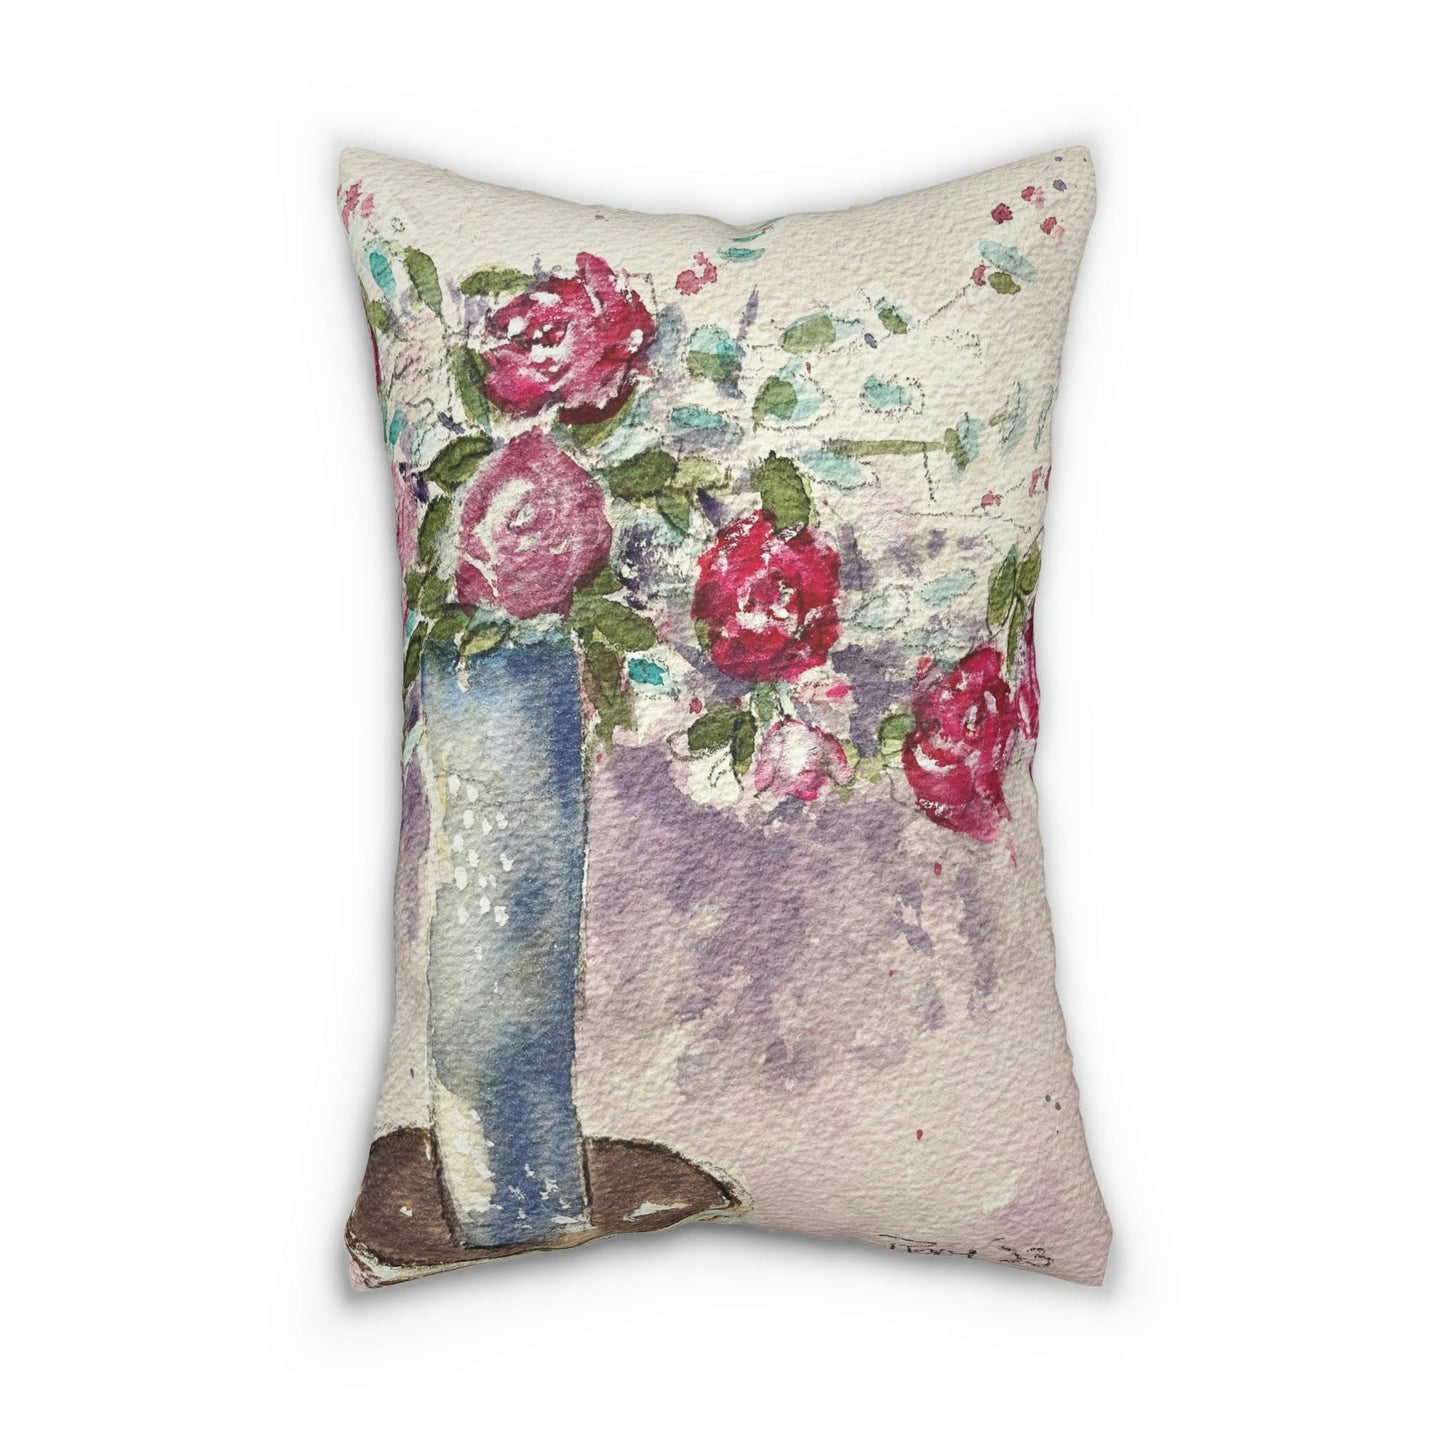 Roses in the Foyer Lumbar Pillow Printed on both Sides